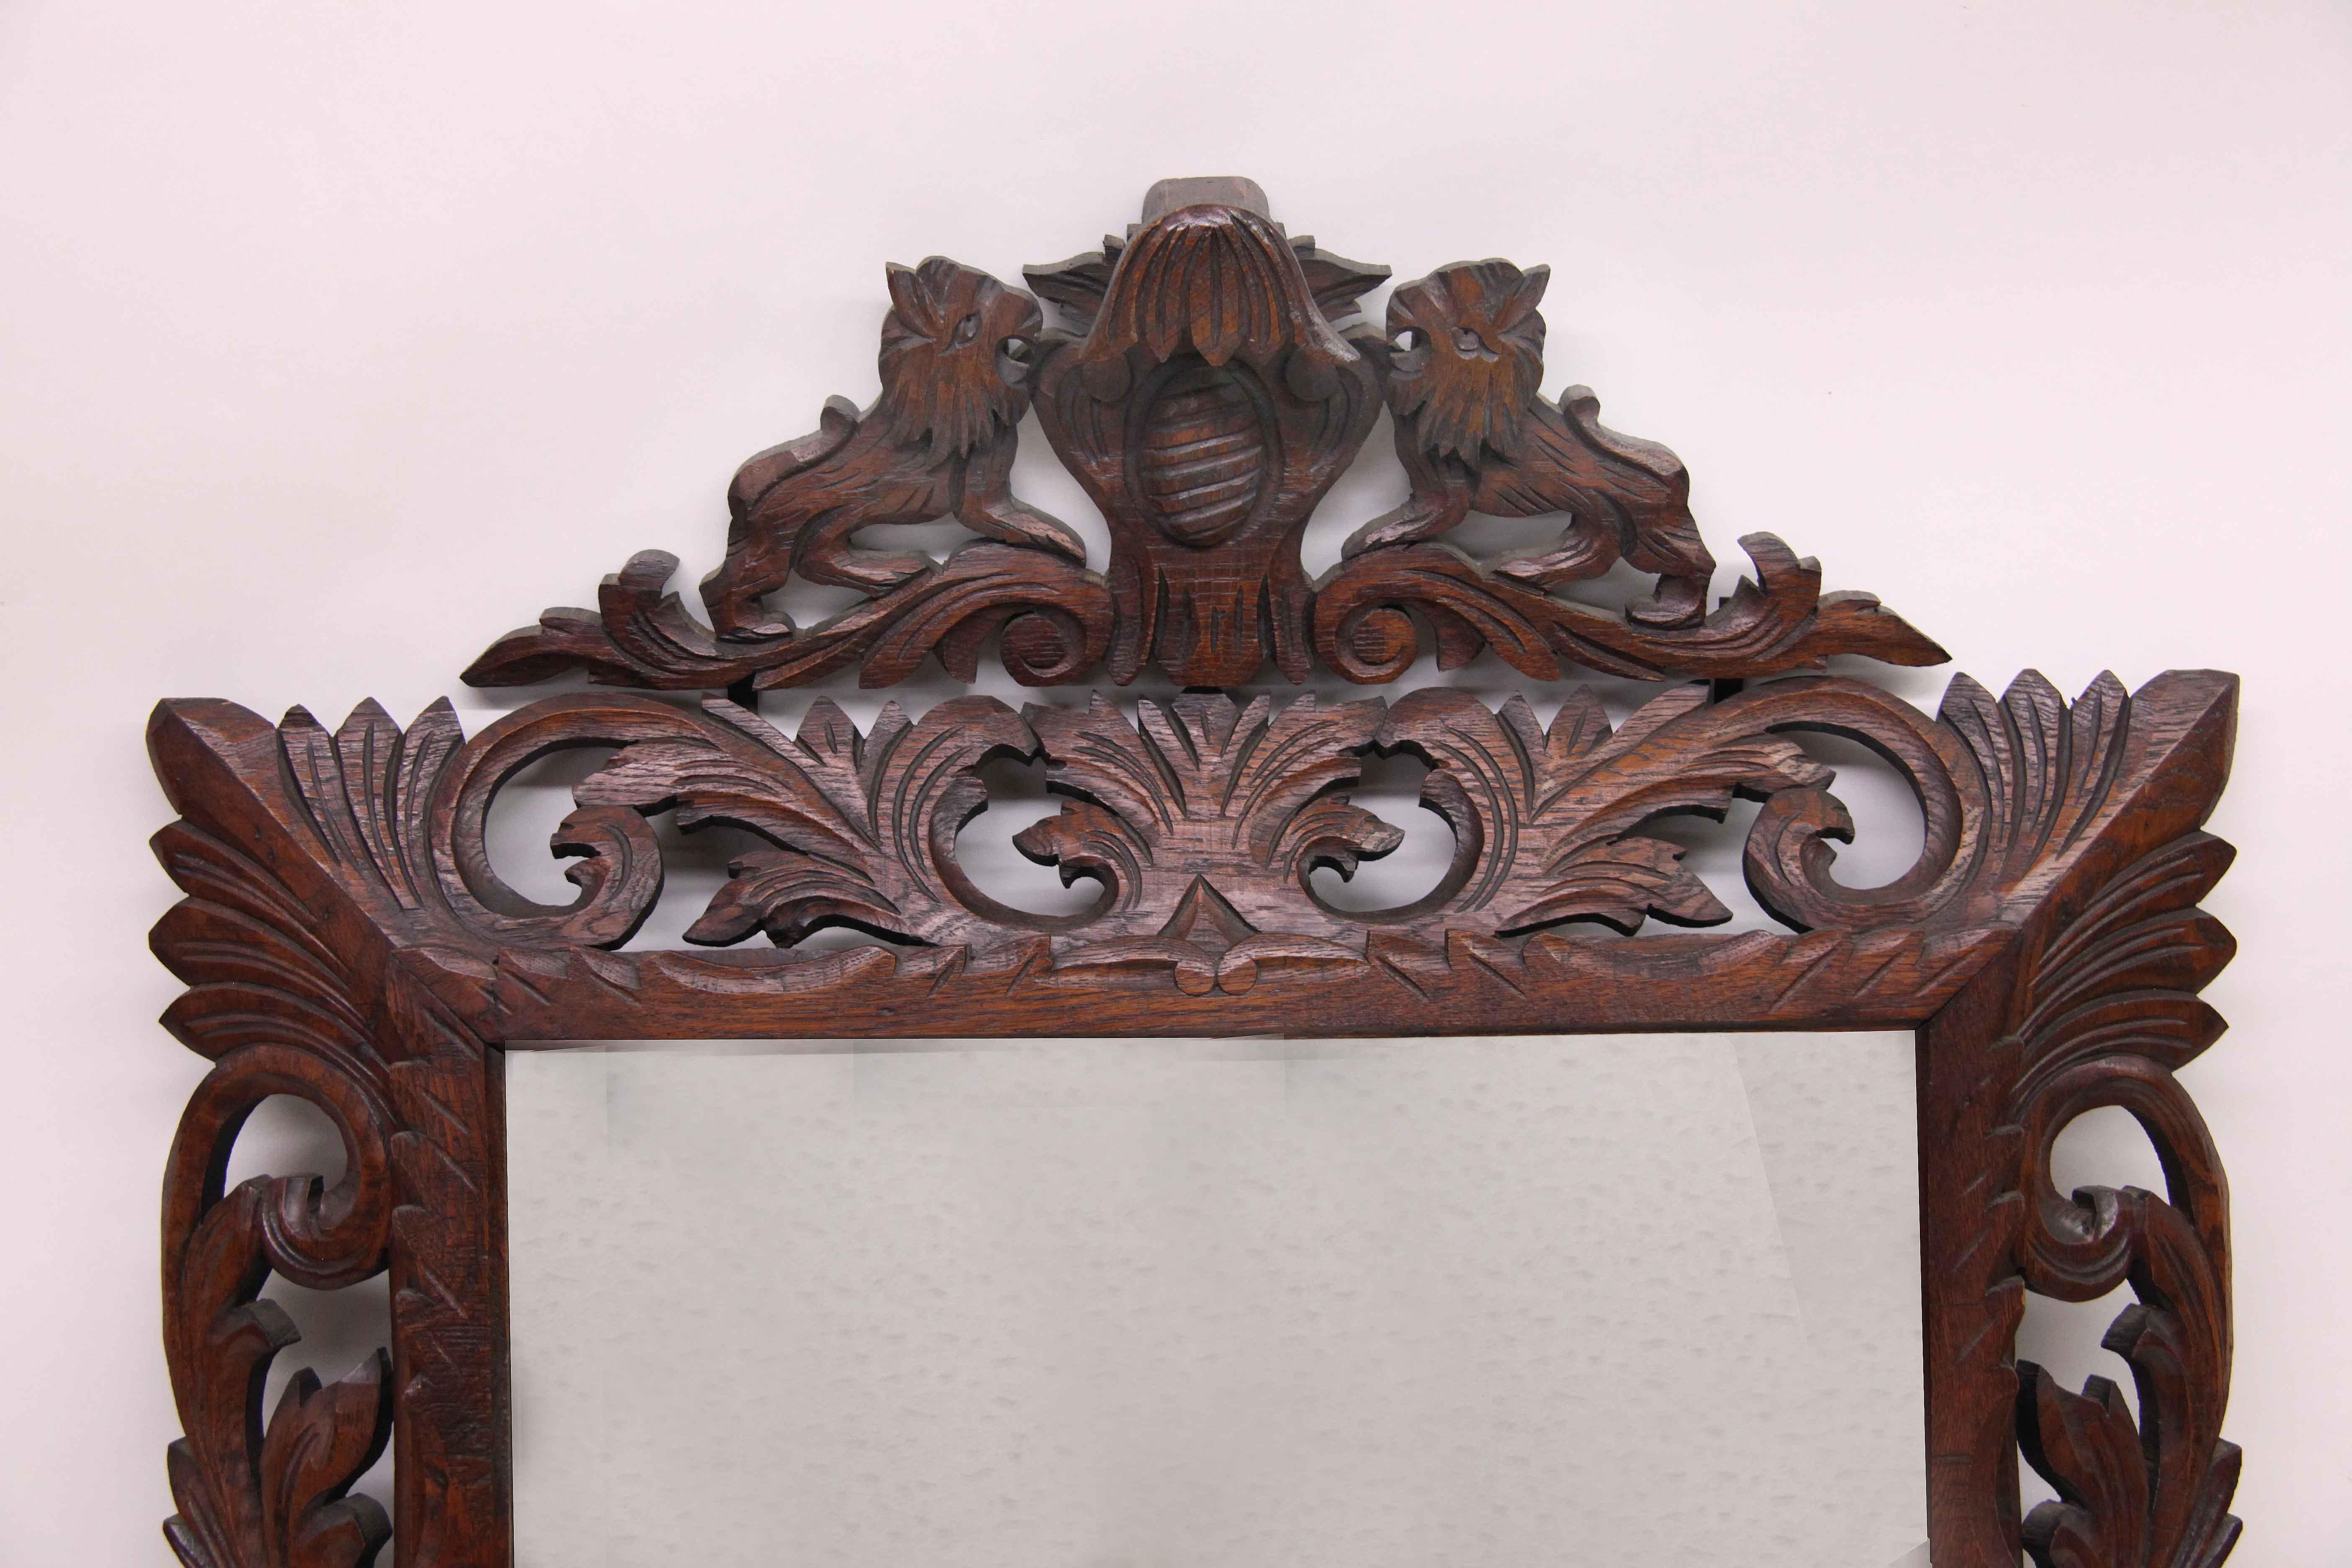 Carved oak French mirror, the separate top carving features lions facing each other between an oval vertical medallion and stylized bell flower (This piece is held on the back with metal straps). The angled carved woodwork frame has a repetitive